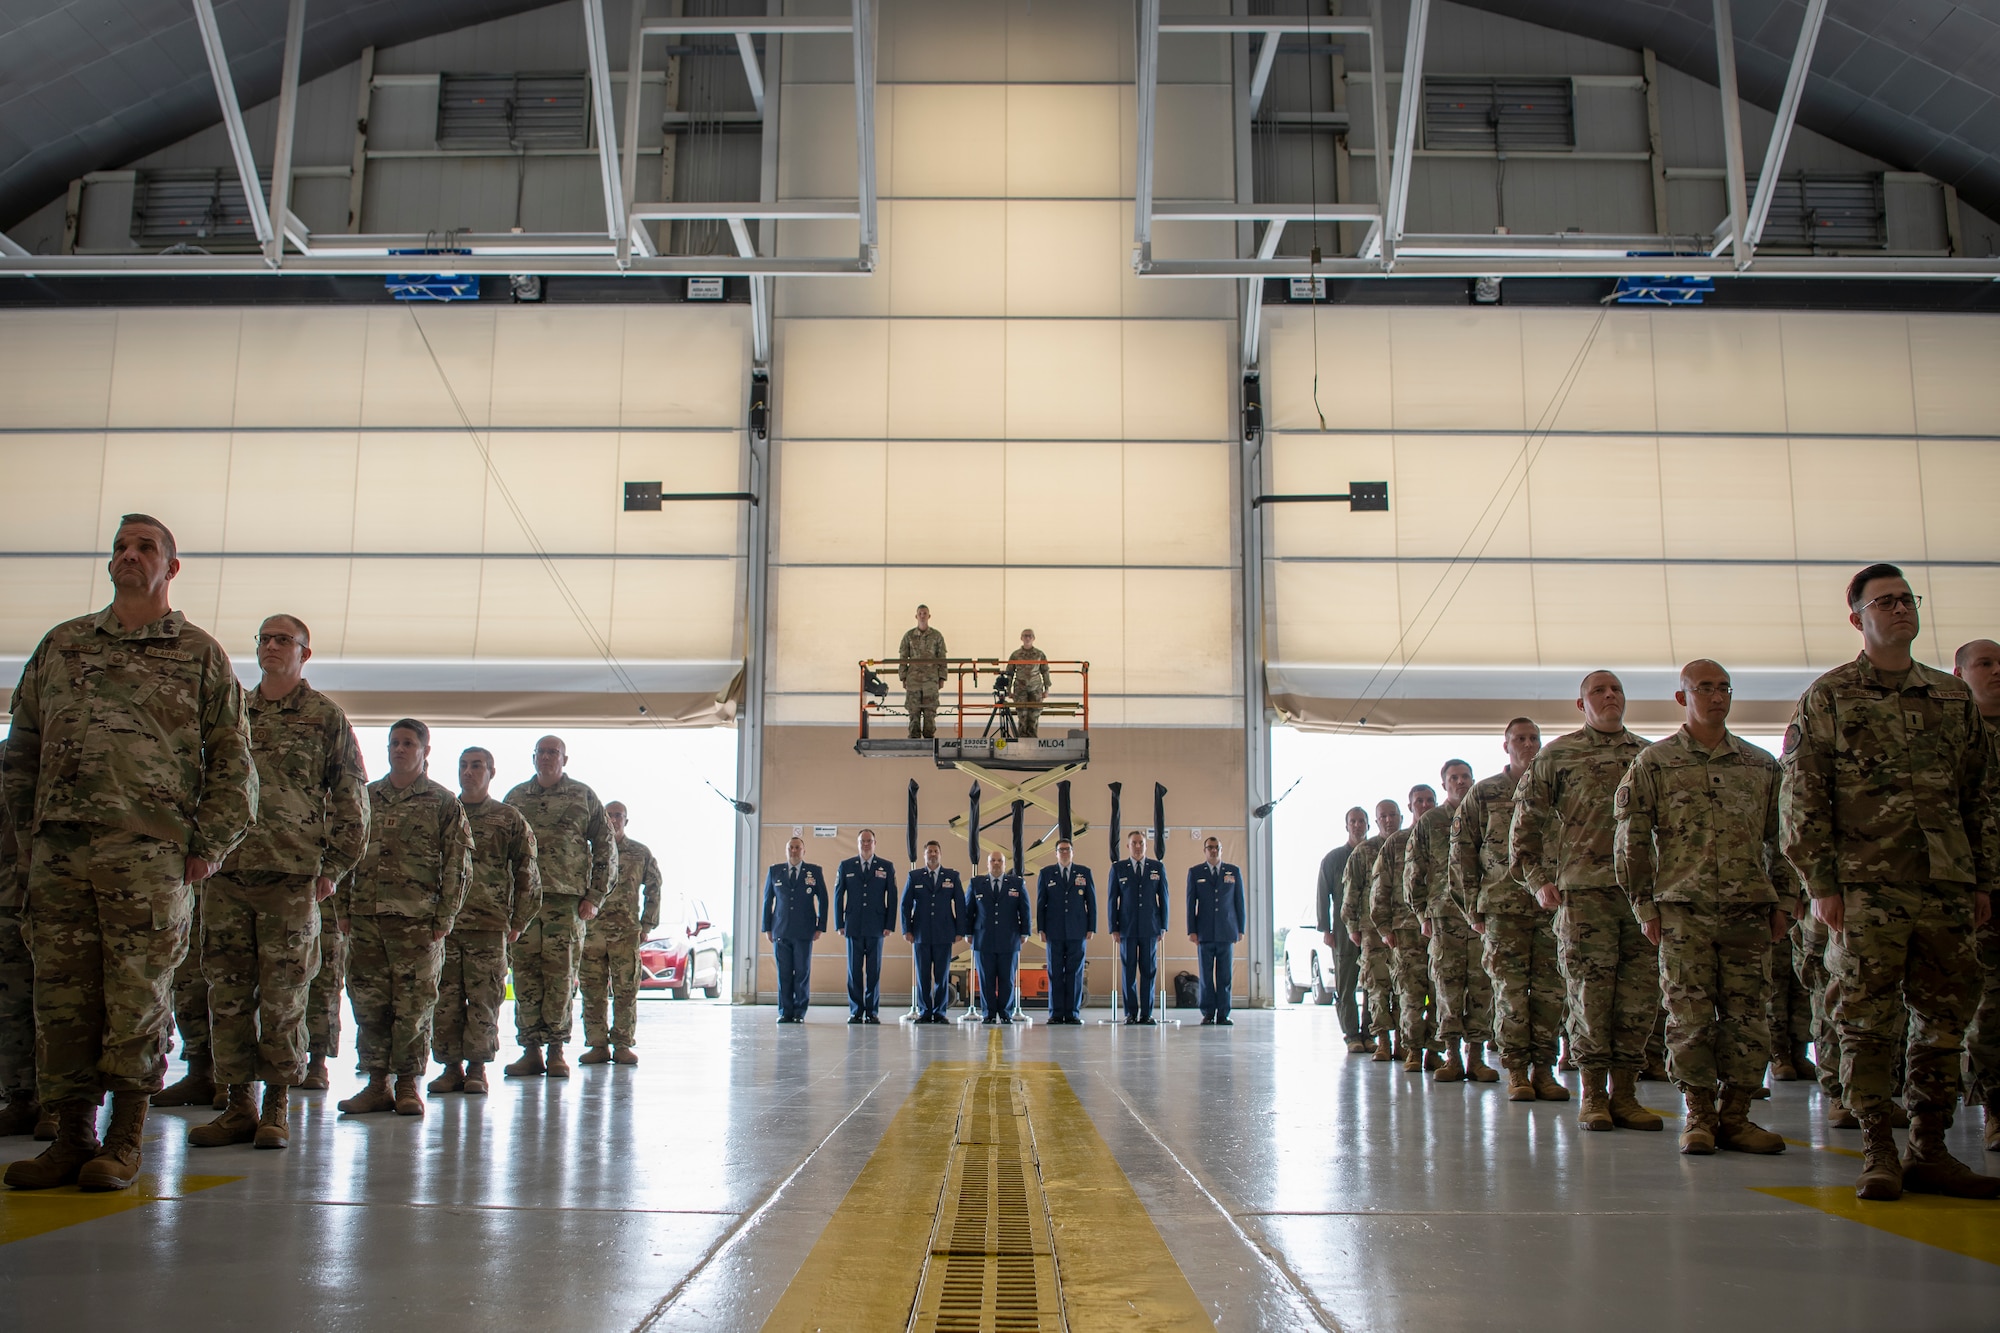 The 179th Airlift Wing, an Ohio Air National Guard unit, is redesignated as the 179th Cyberspace Wing